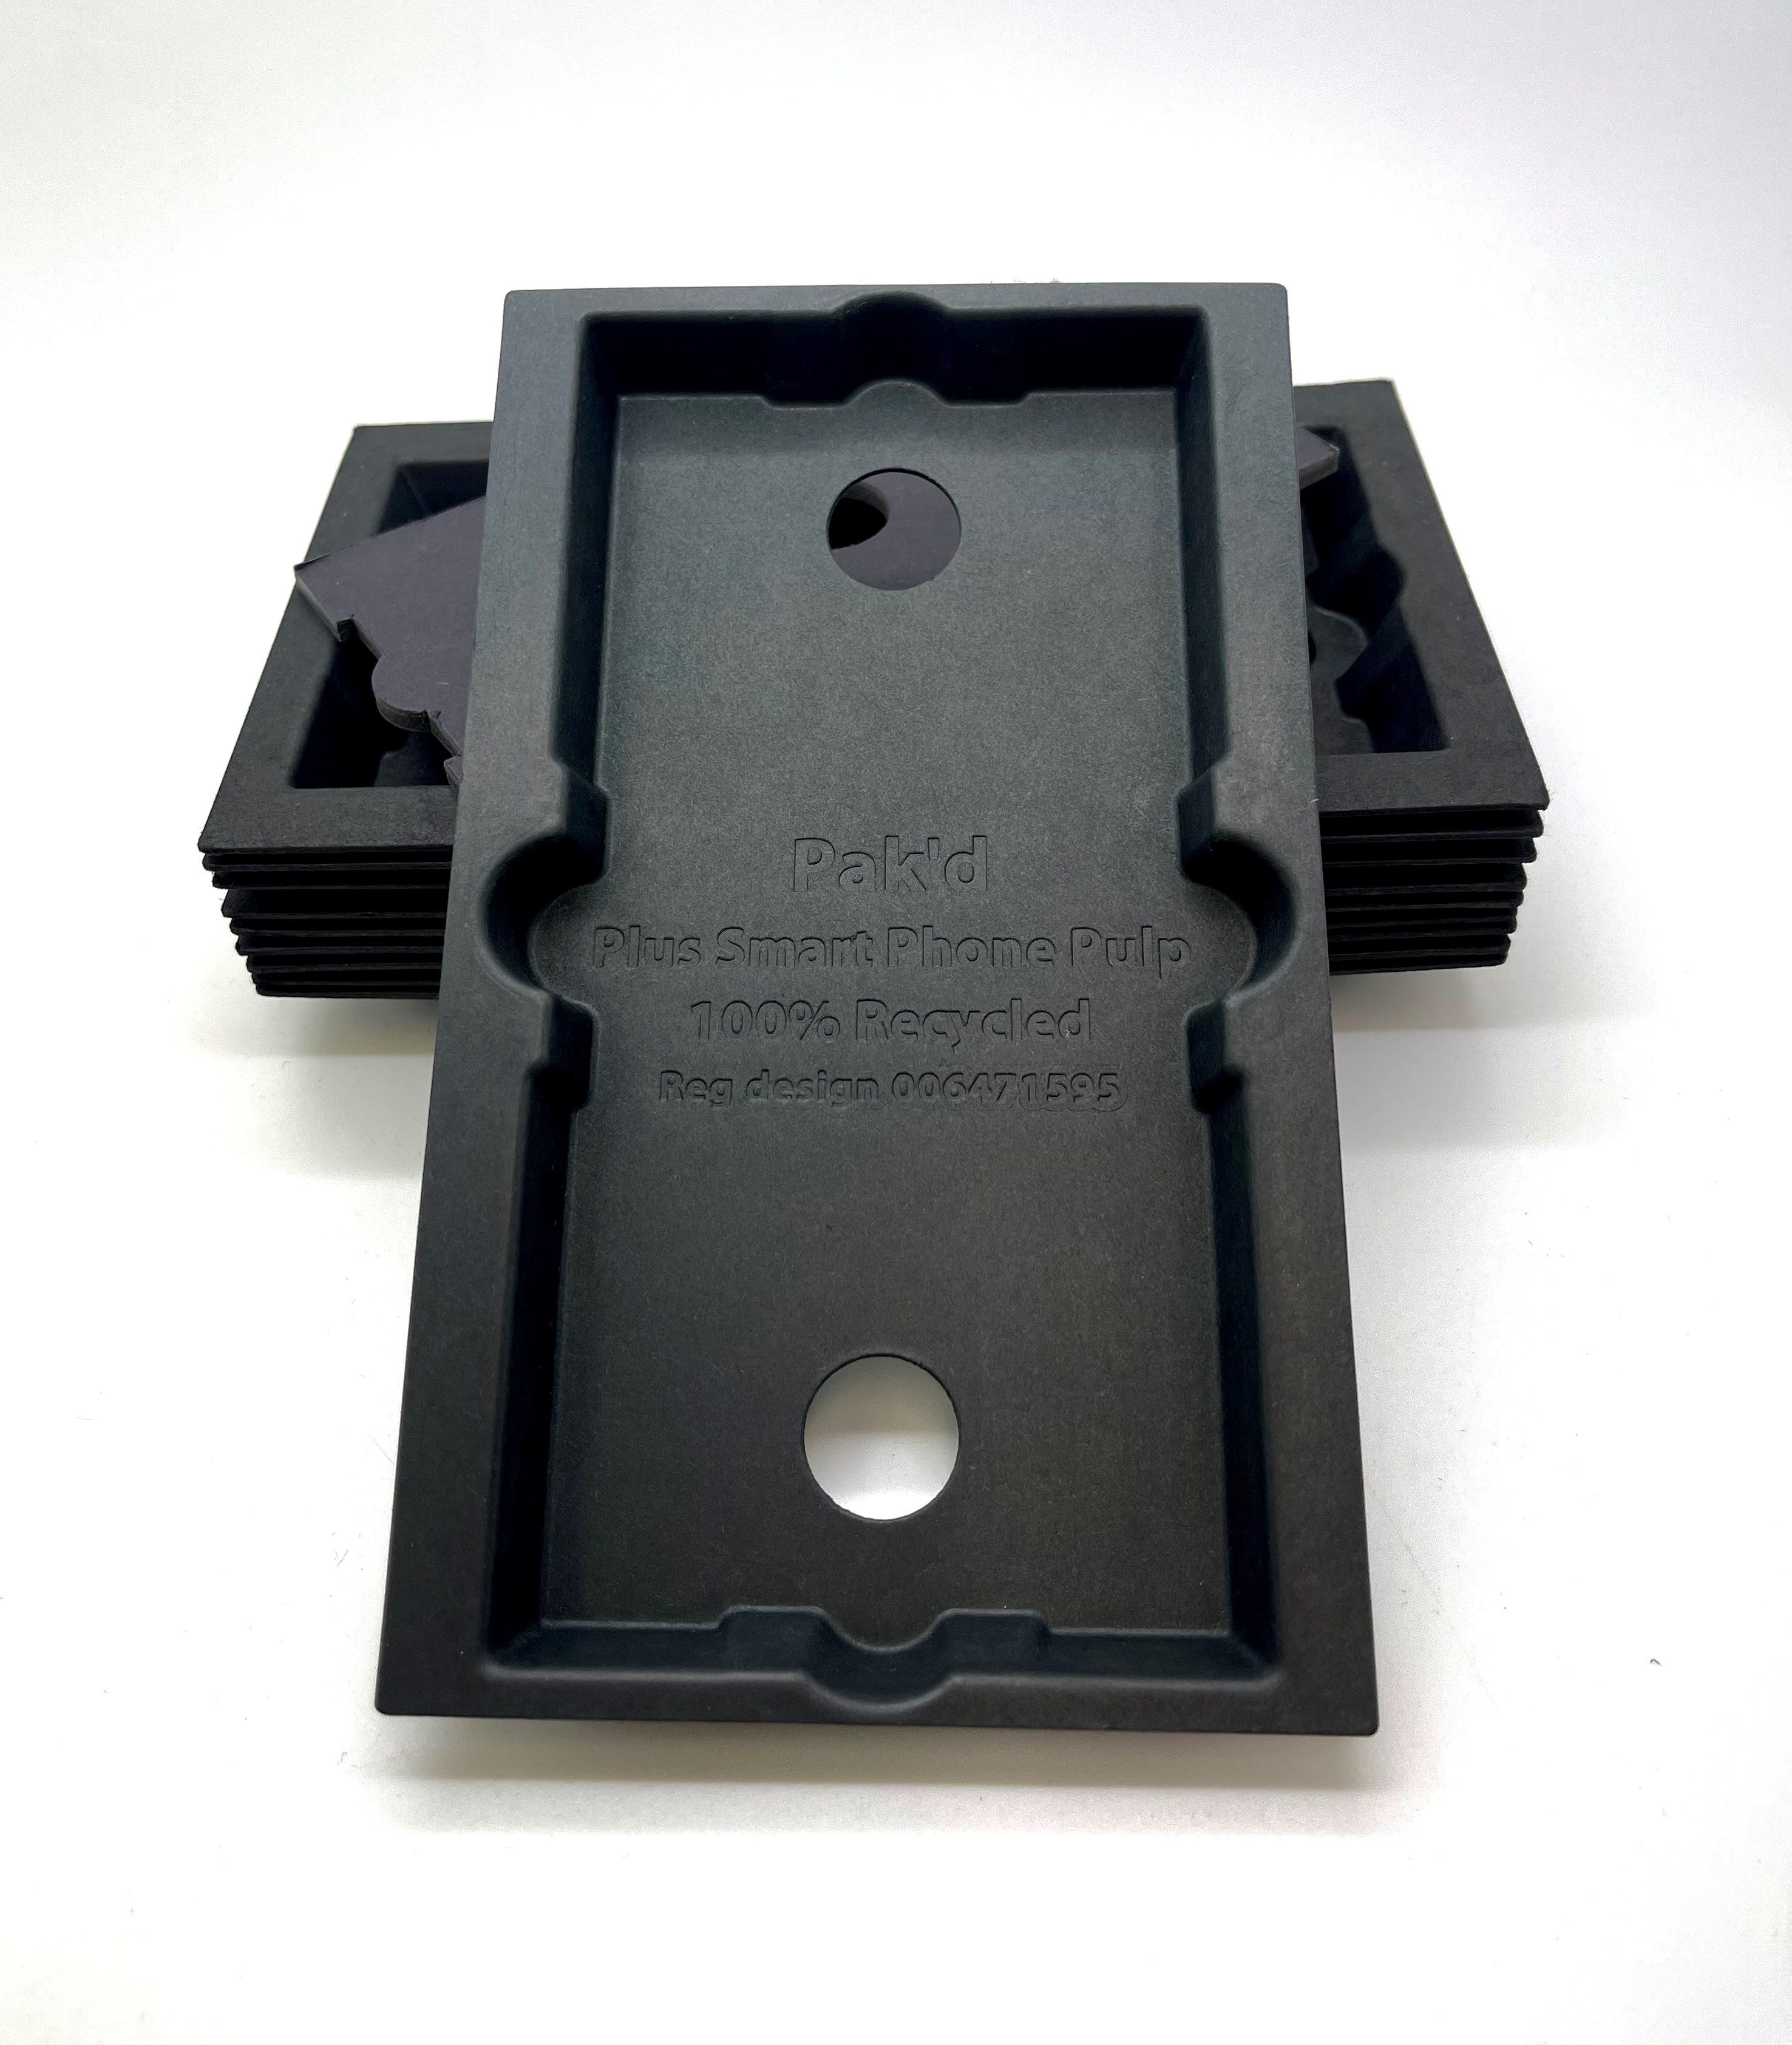 PLUS: Insert Tray with Spacer